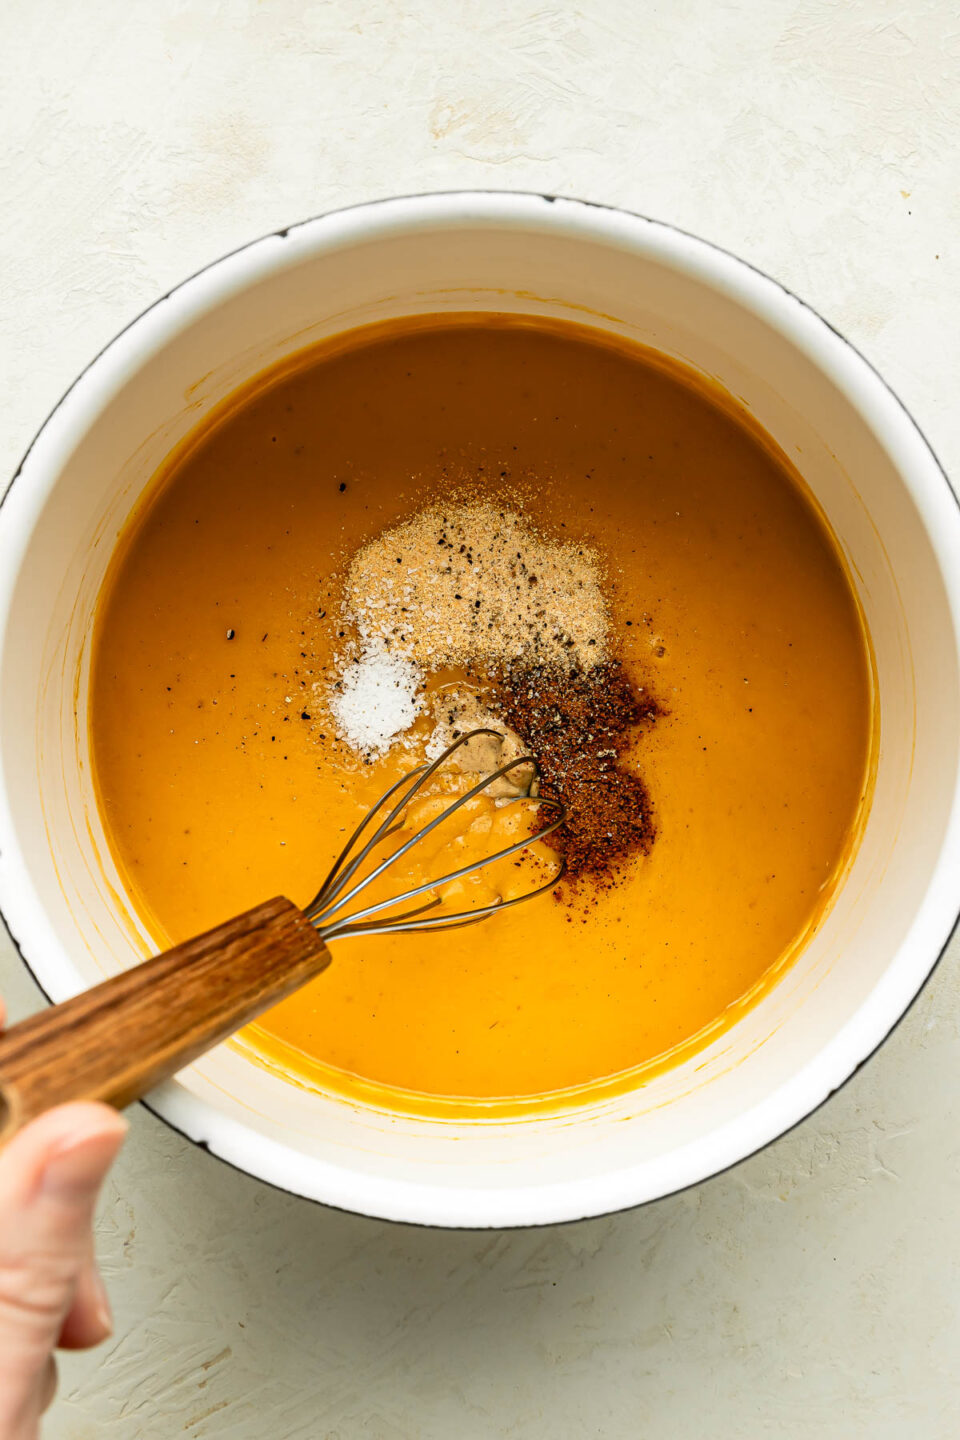 An overhead shot of a woman's hand whisking a saucepan of soup and dried spices on an off-white surface.